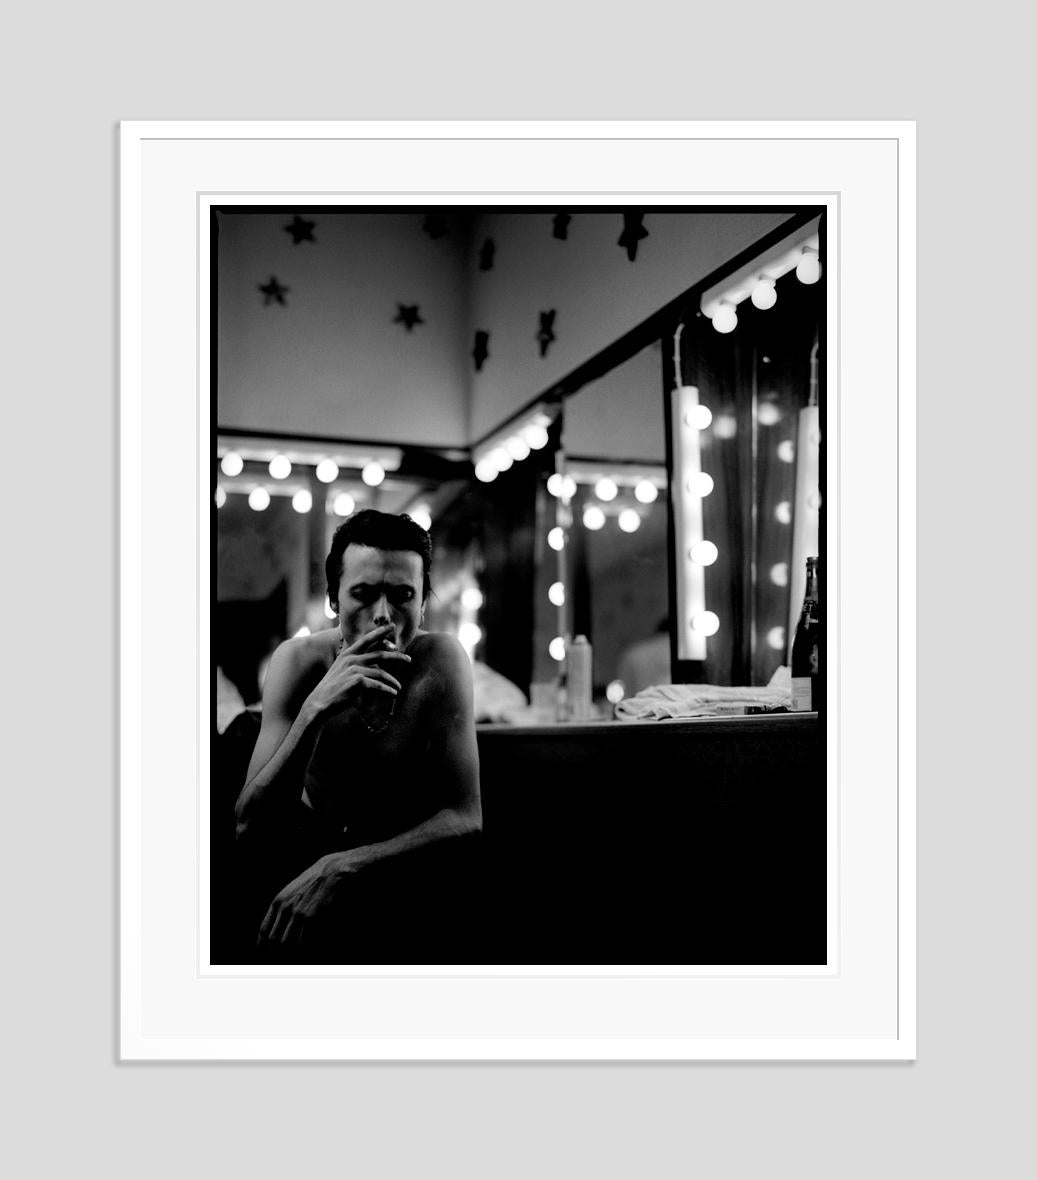 Brett Anderson

Brett smoking in the dressing room, Suede.

2022

by Kevin Westenberg
Signed Limited Edition

Kevin Westenberg is famed for his creation of provocative and electrifying images of world-class musicians, artists and movie stars for